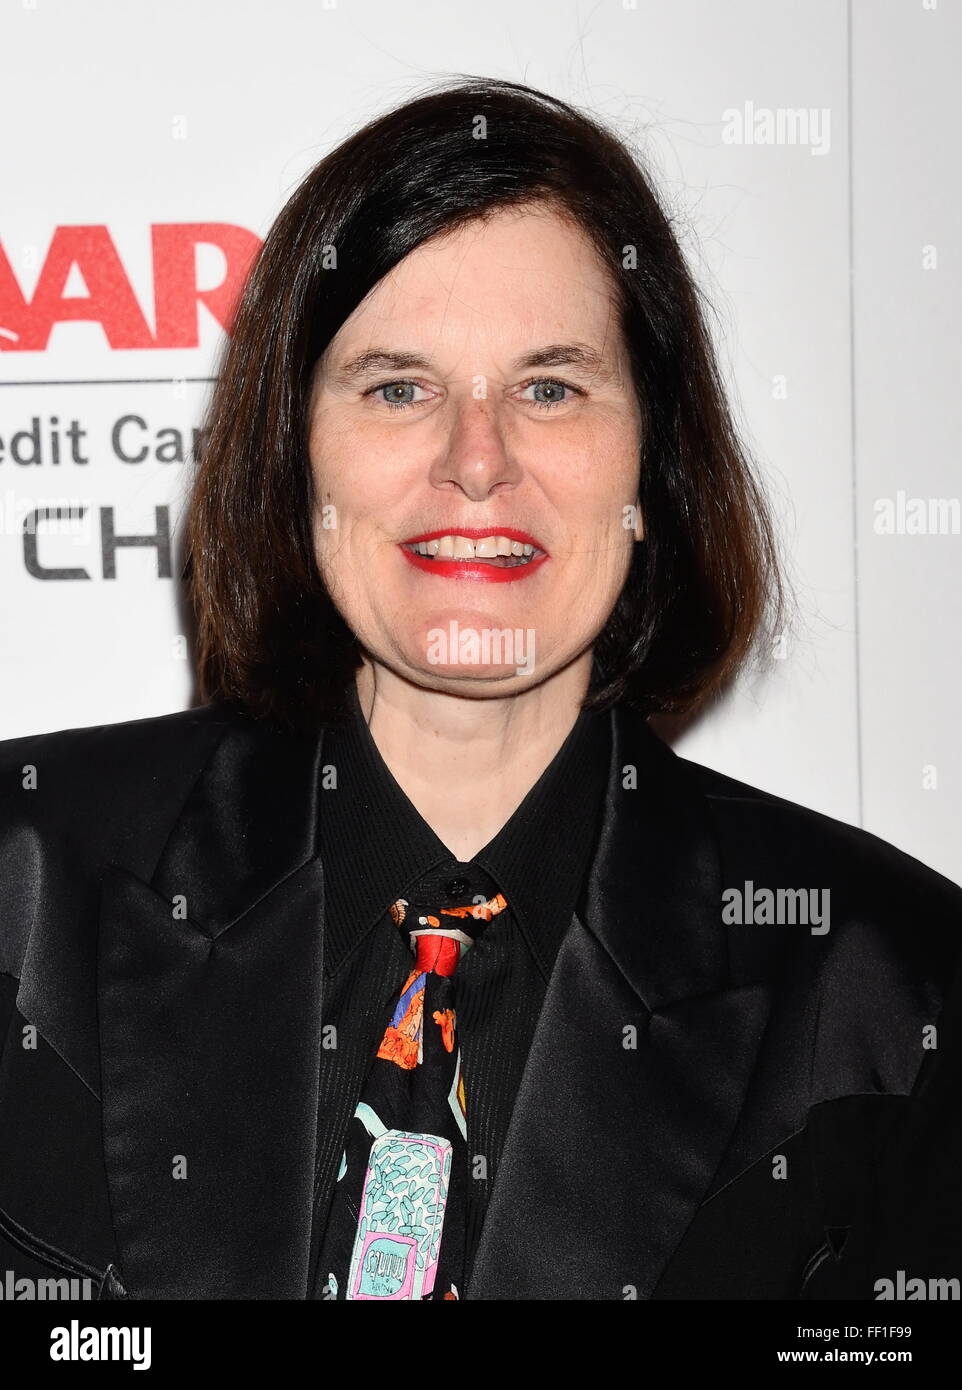 Beverly Hills, California. 8th Feb, 2016. BEVERLY HILLS, CA - FEBRUARY 08: Actress/comedienne Paula Poundstone attends AARP's Movie For GrownUps Awards at the Regent Beverly Wilshire Four Seasons Hotel on February 8, 2016 in Beverly Hills, California. © dpa/Alamy Live News Stock Photo